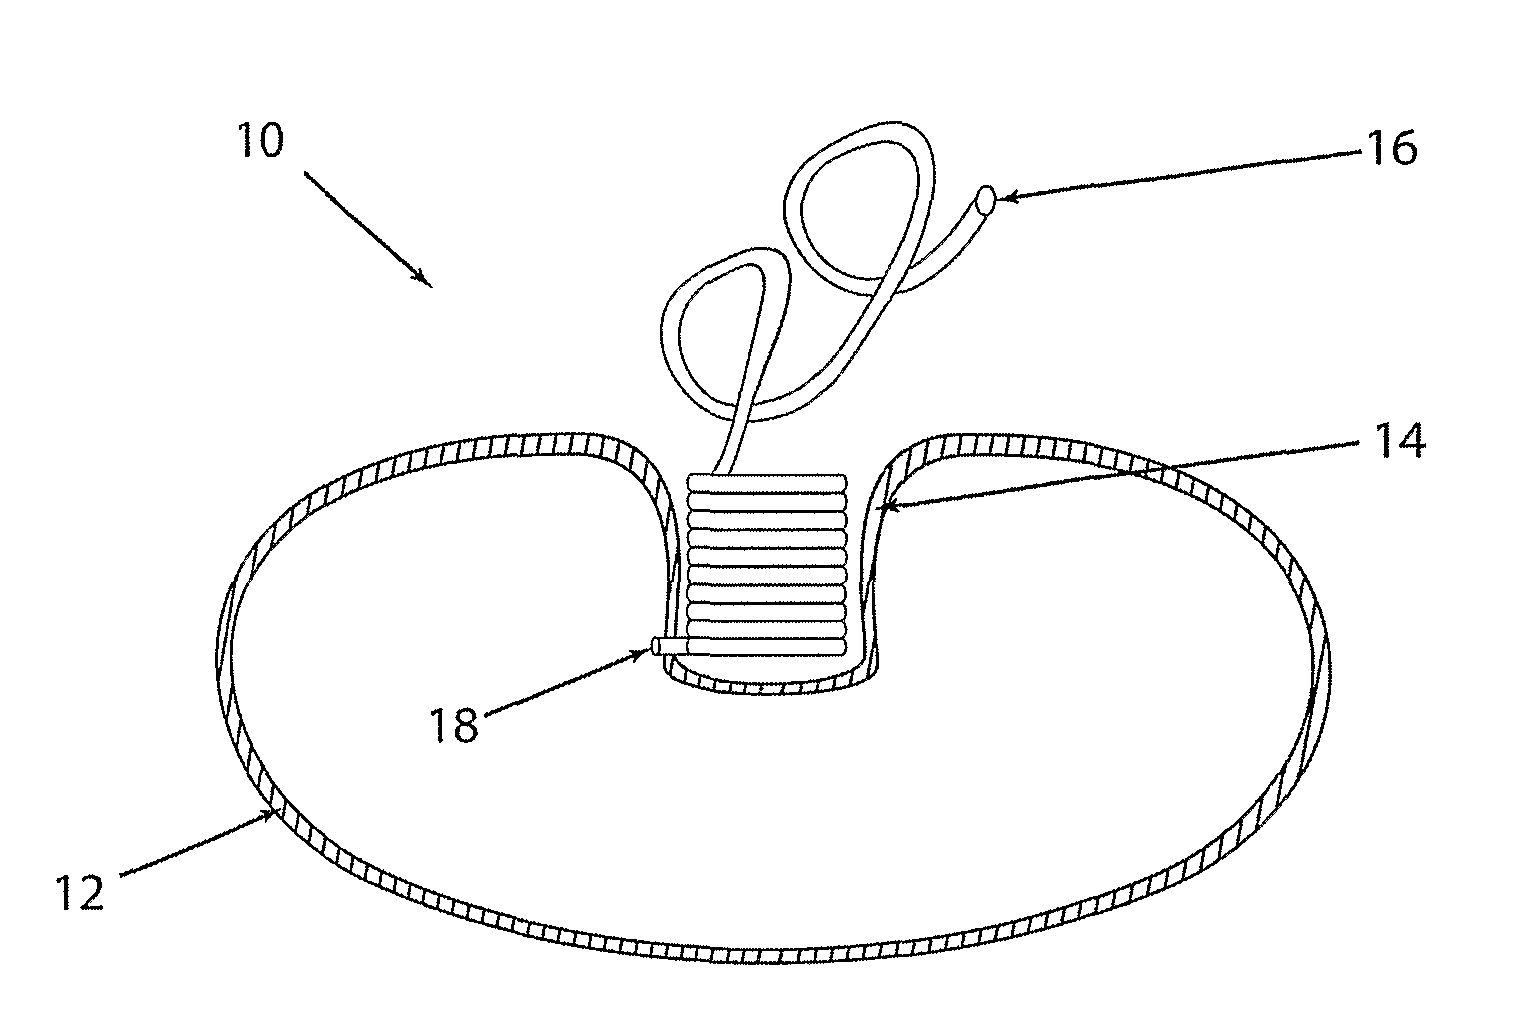 Apparatus and method for volume adjustment of intragastric balloons